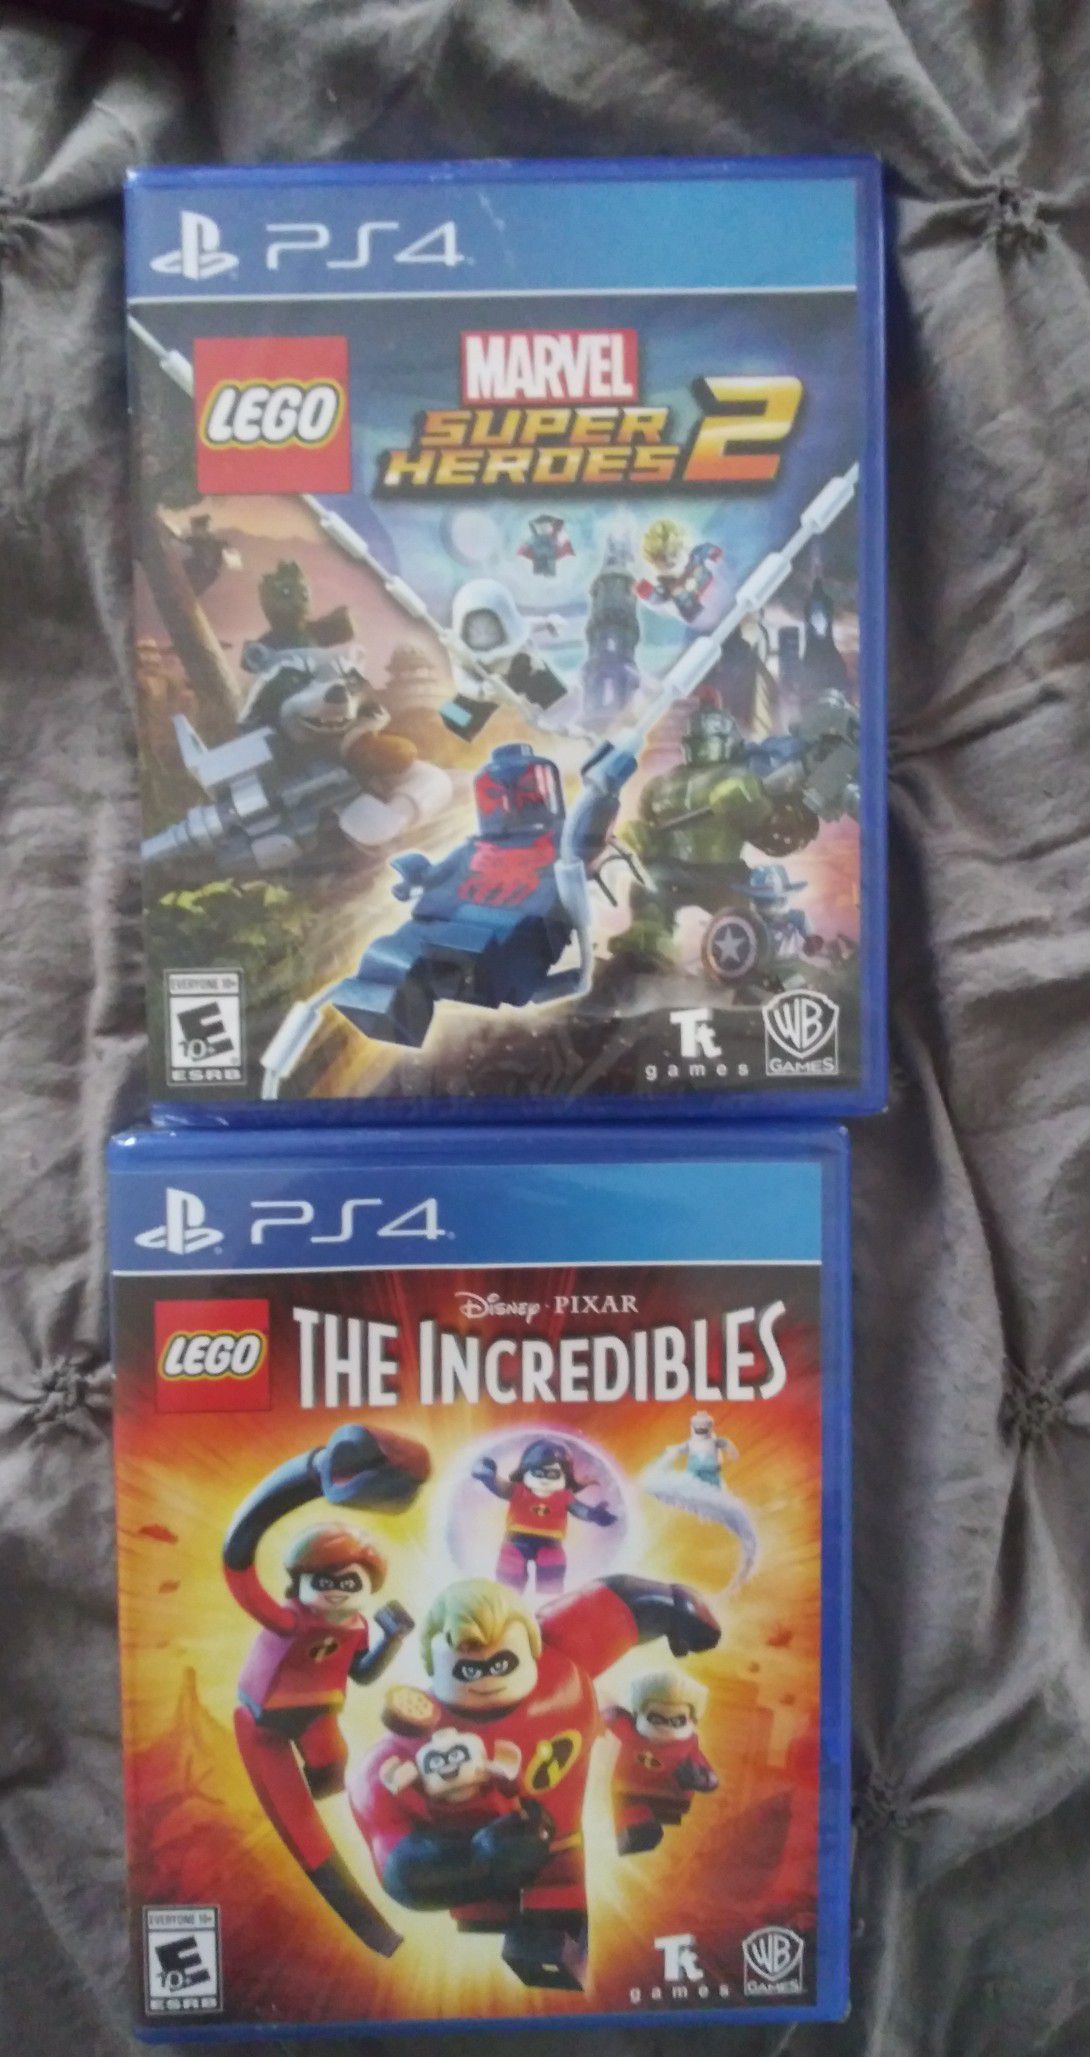 2 New PS4 games